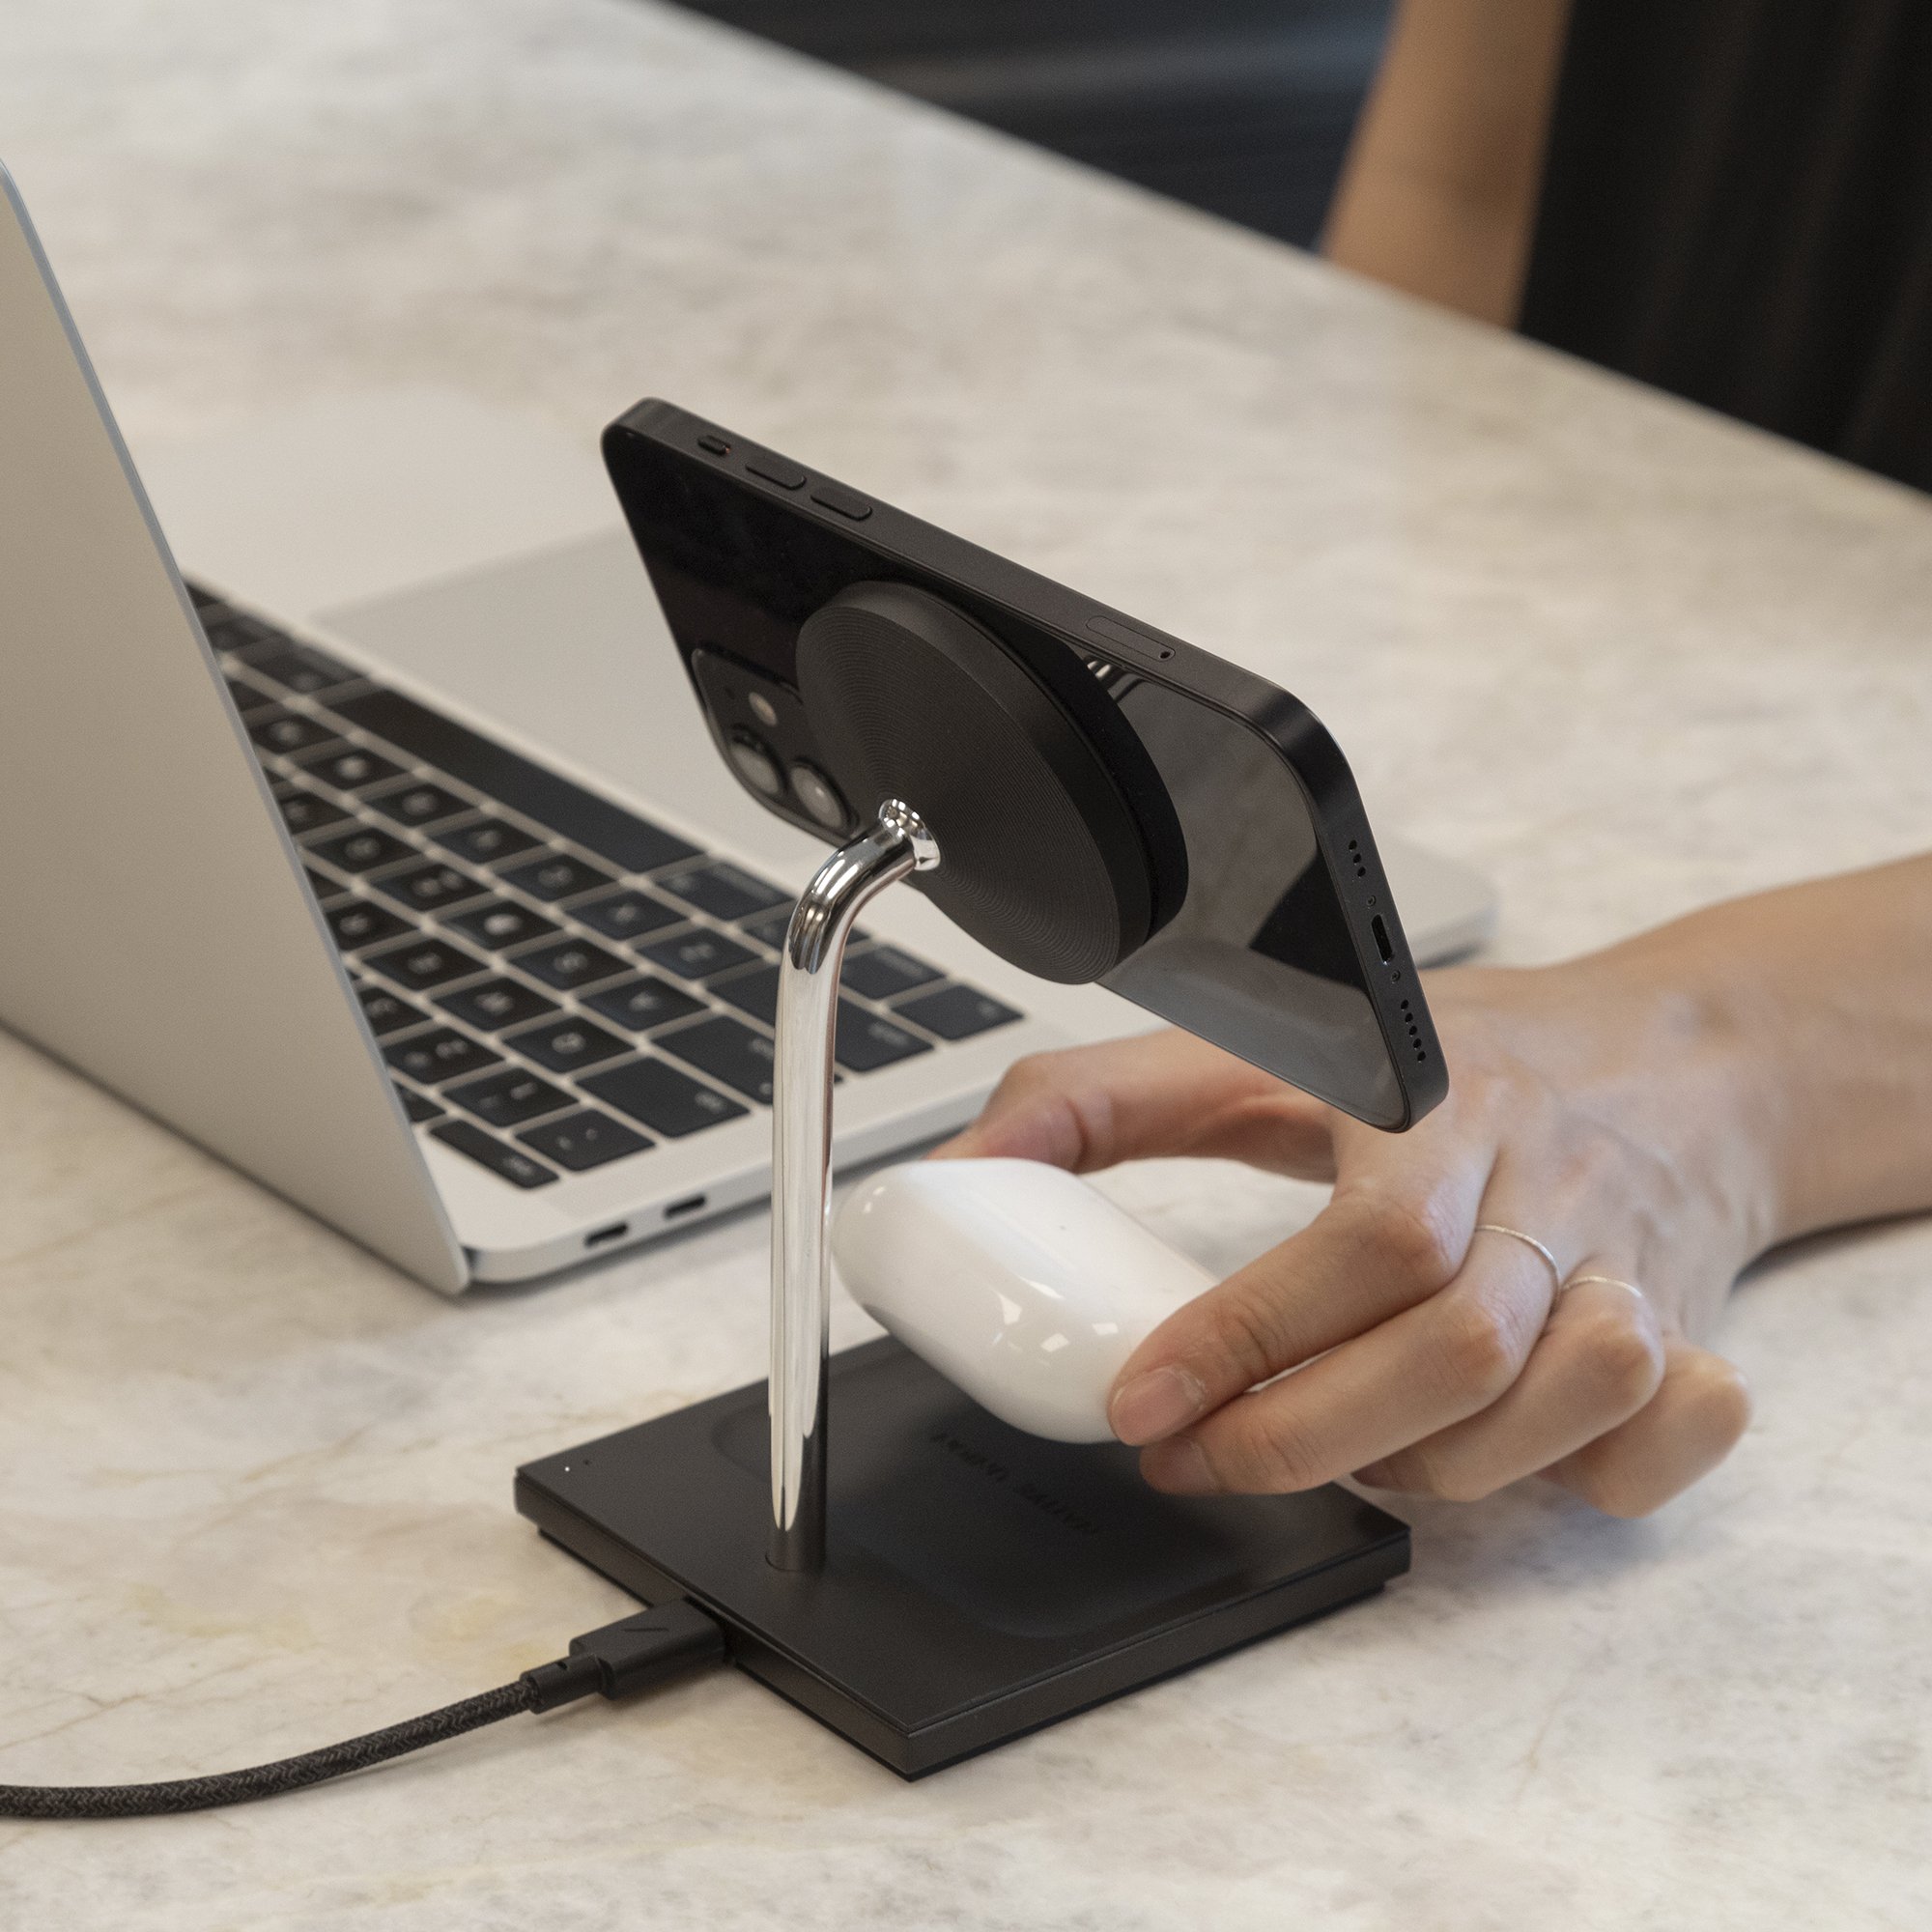 SNAP 2 in 1 MAGNETIC WIRELESS CHARGER